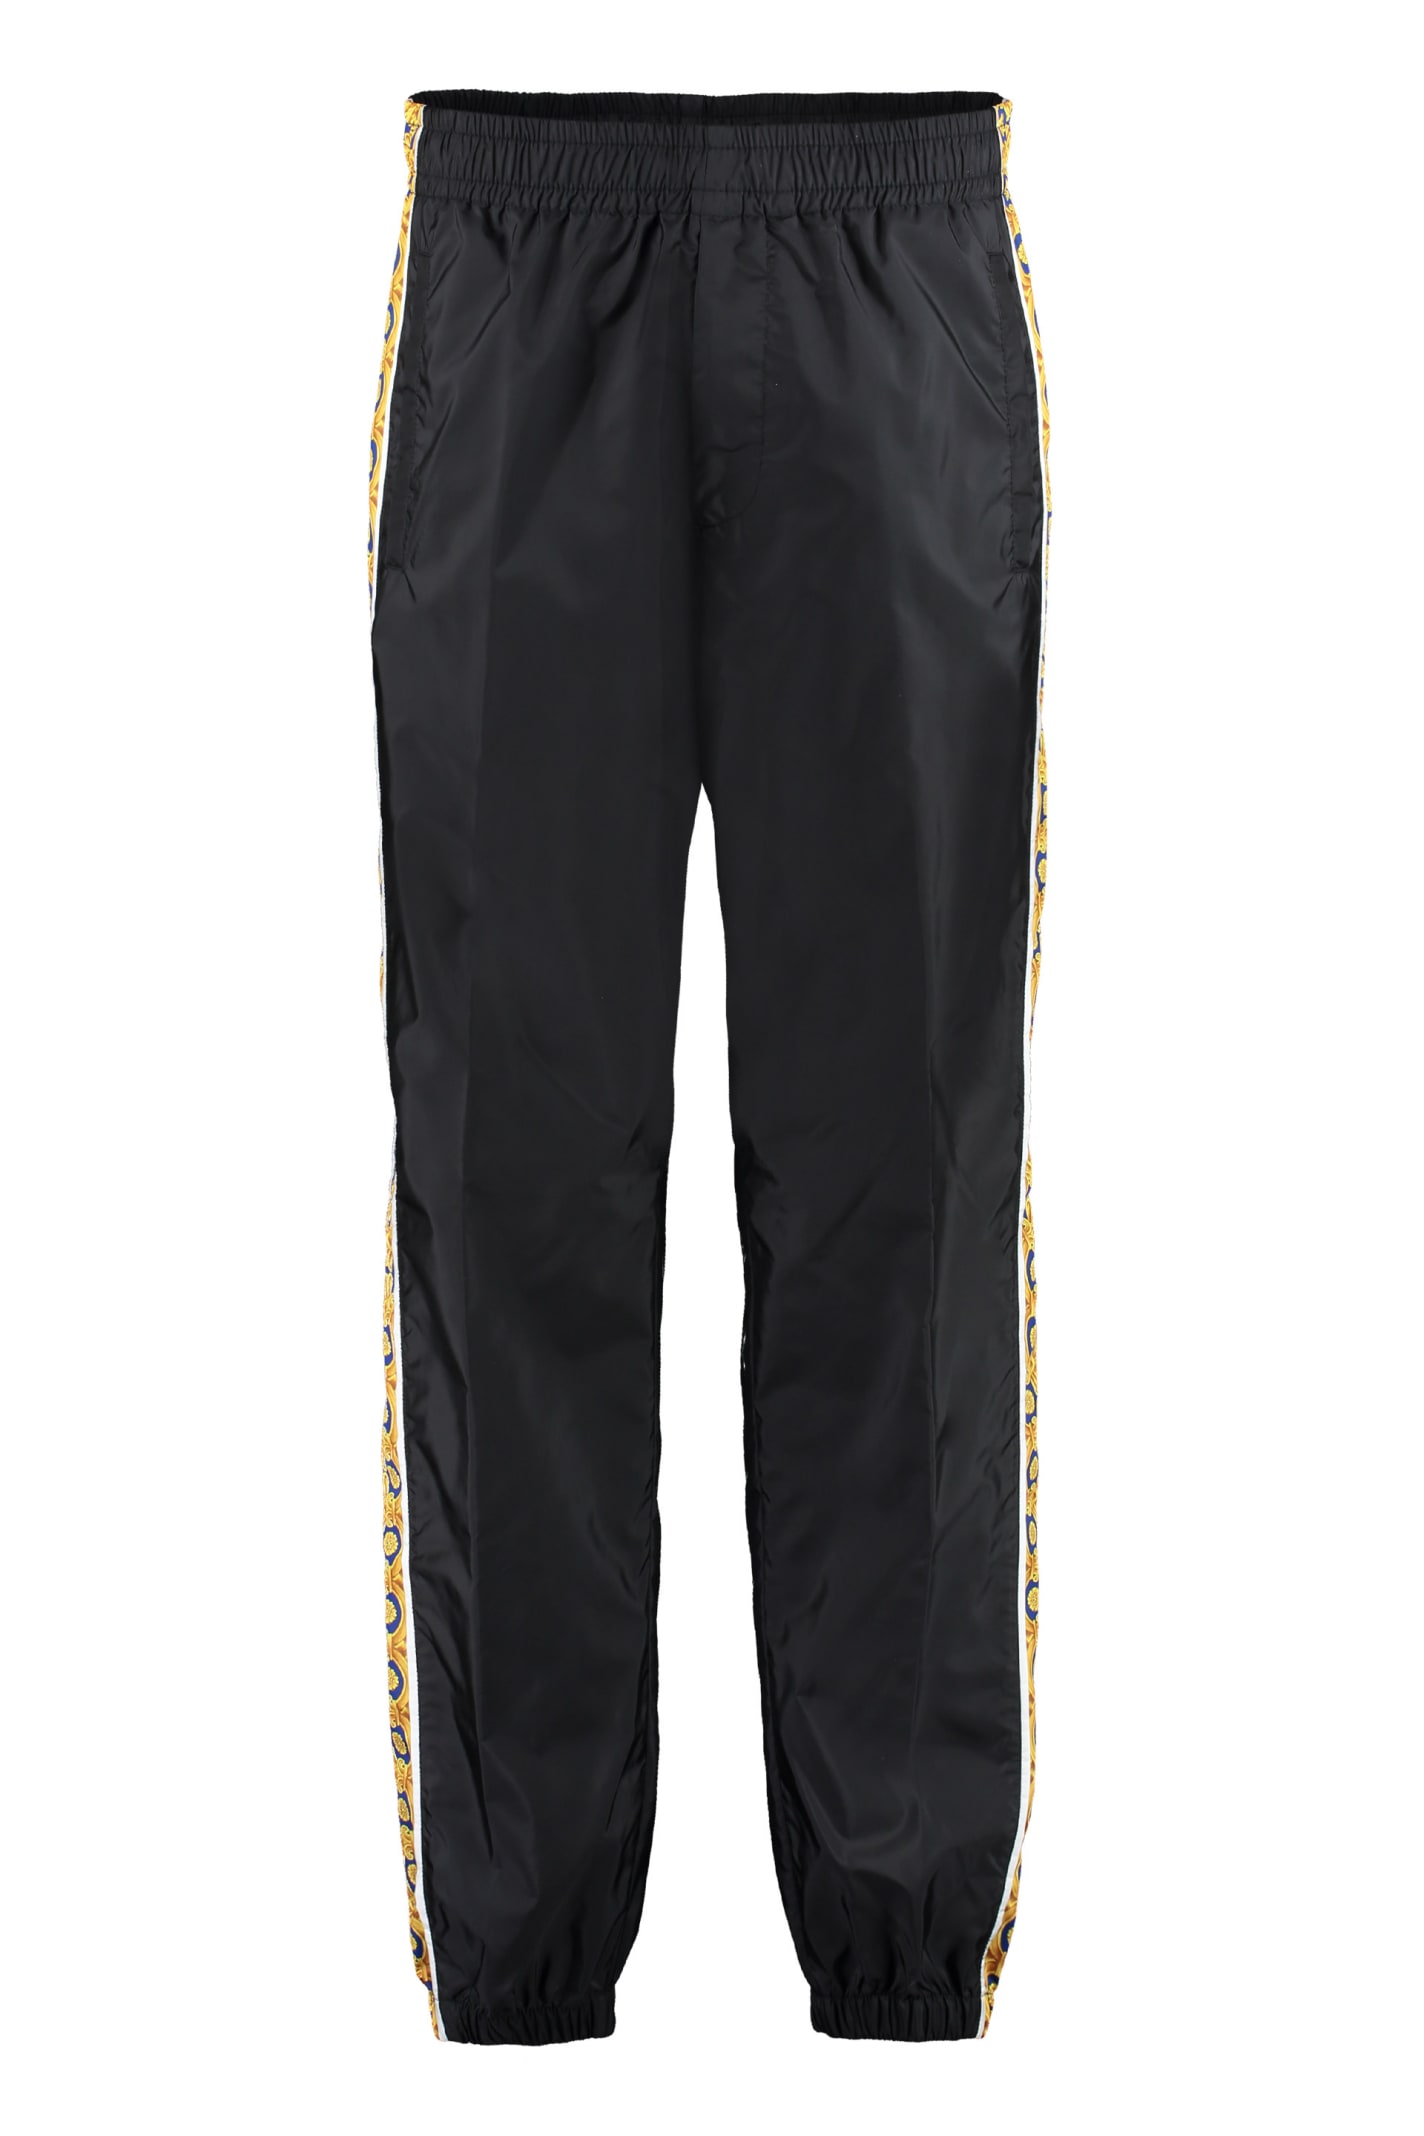 VERSACE TRACK-trousers WITH CONTRASTING SIDE STRIPES